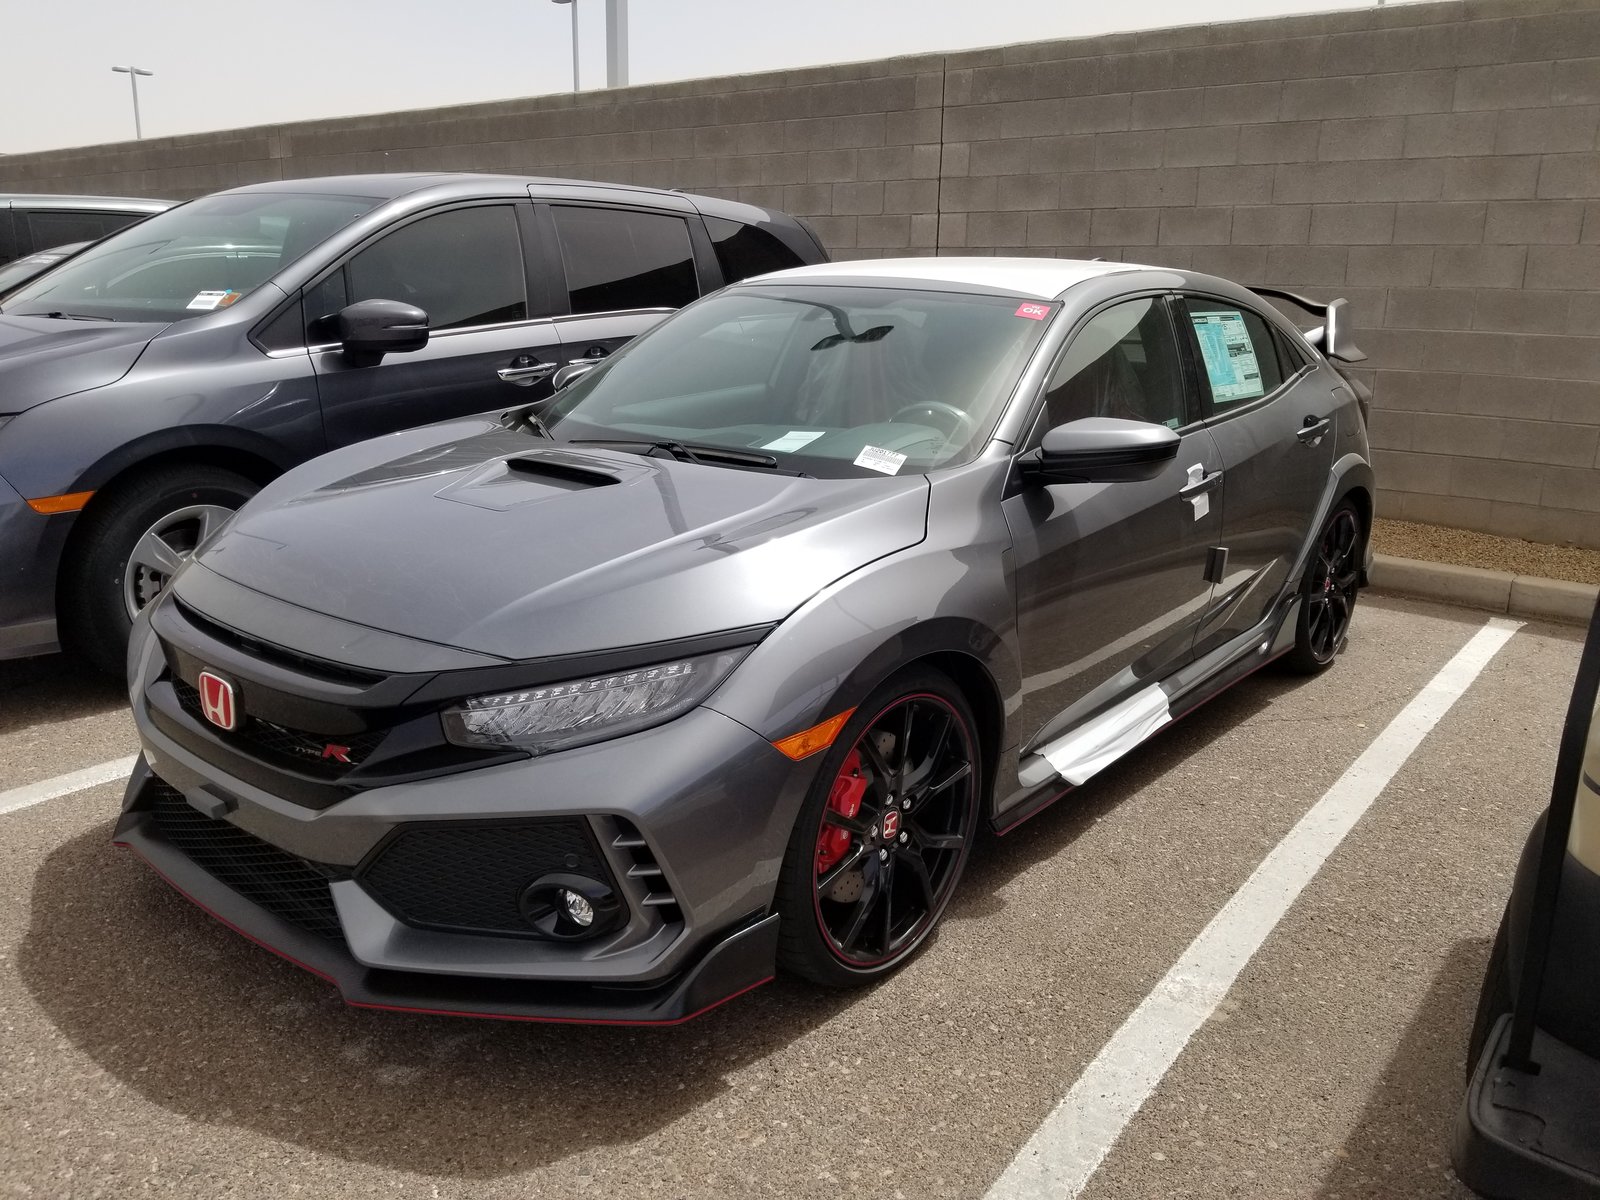 Honda Civic 10th gen Recommended Options and Mods? 2018 Type-R